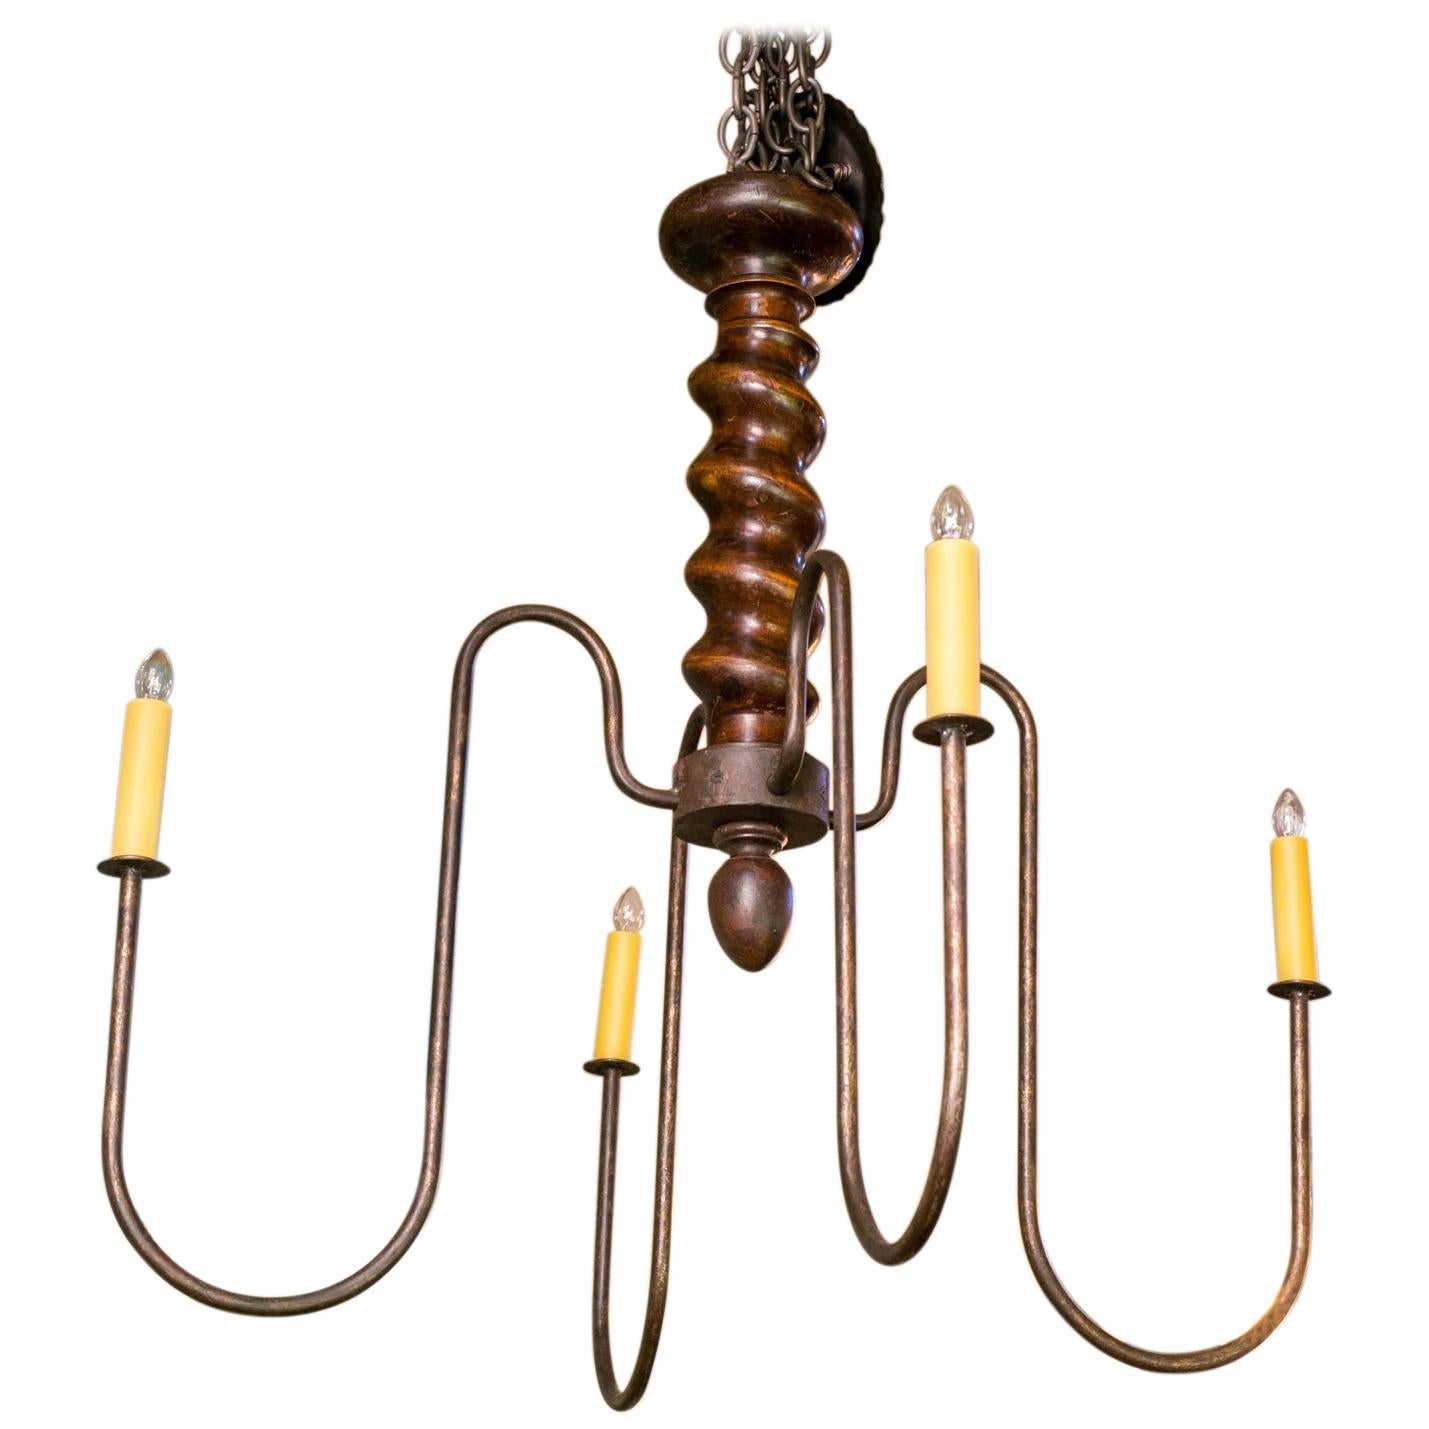 Wooden Arm Chandelier - 2 For Sale on 1stDibs